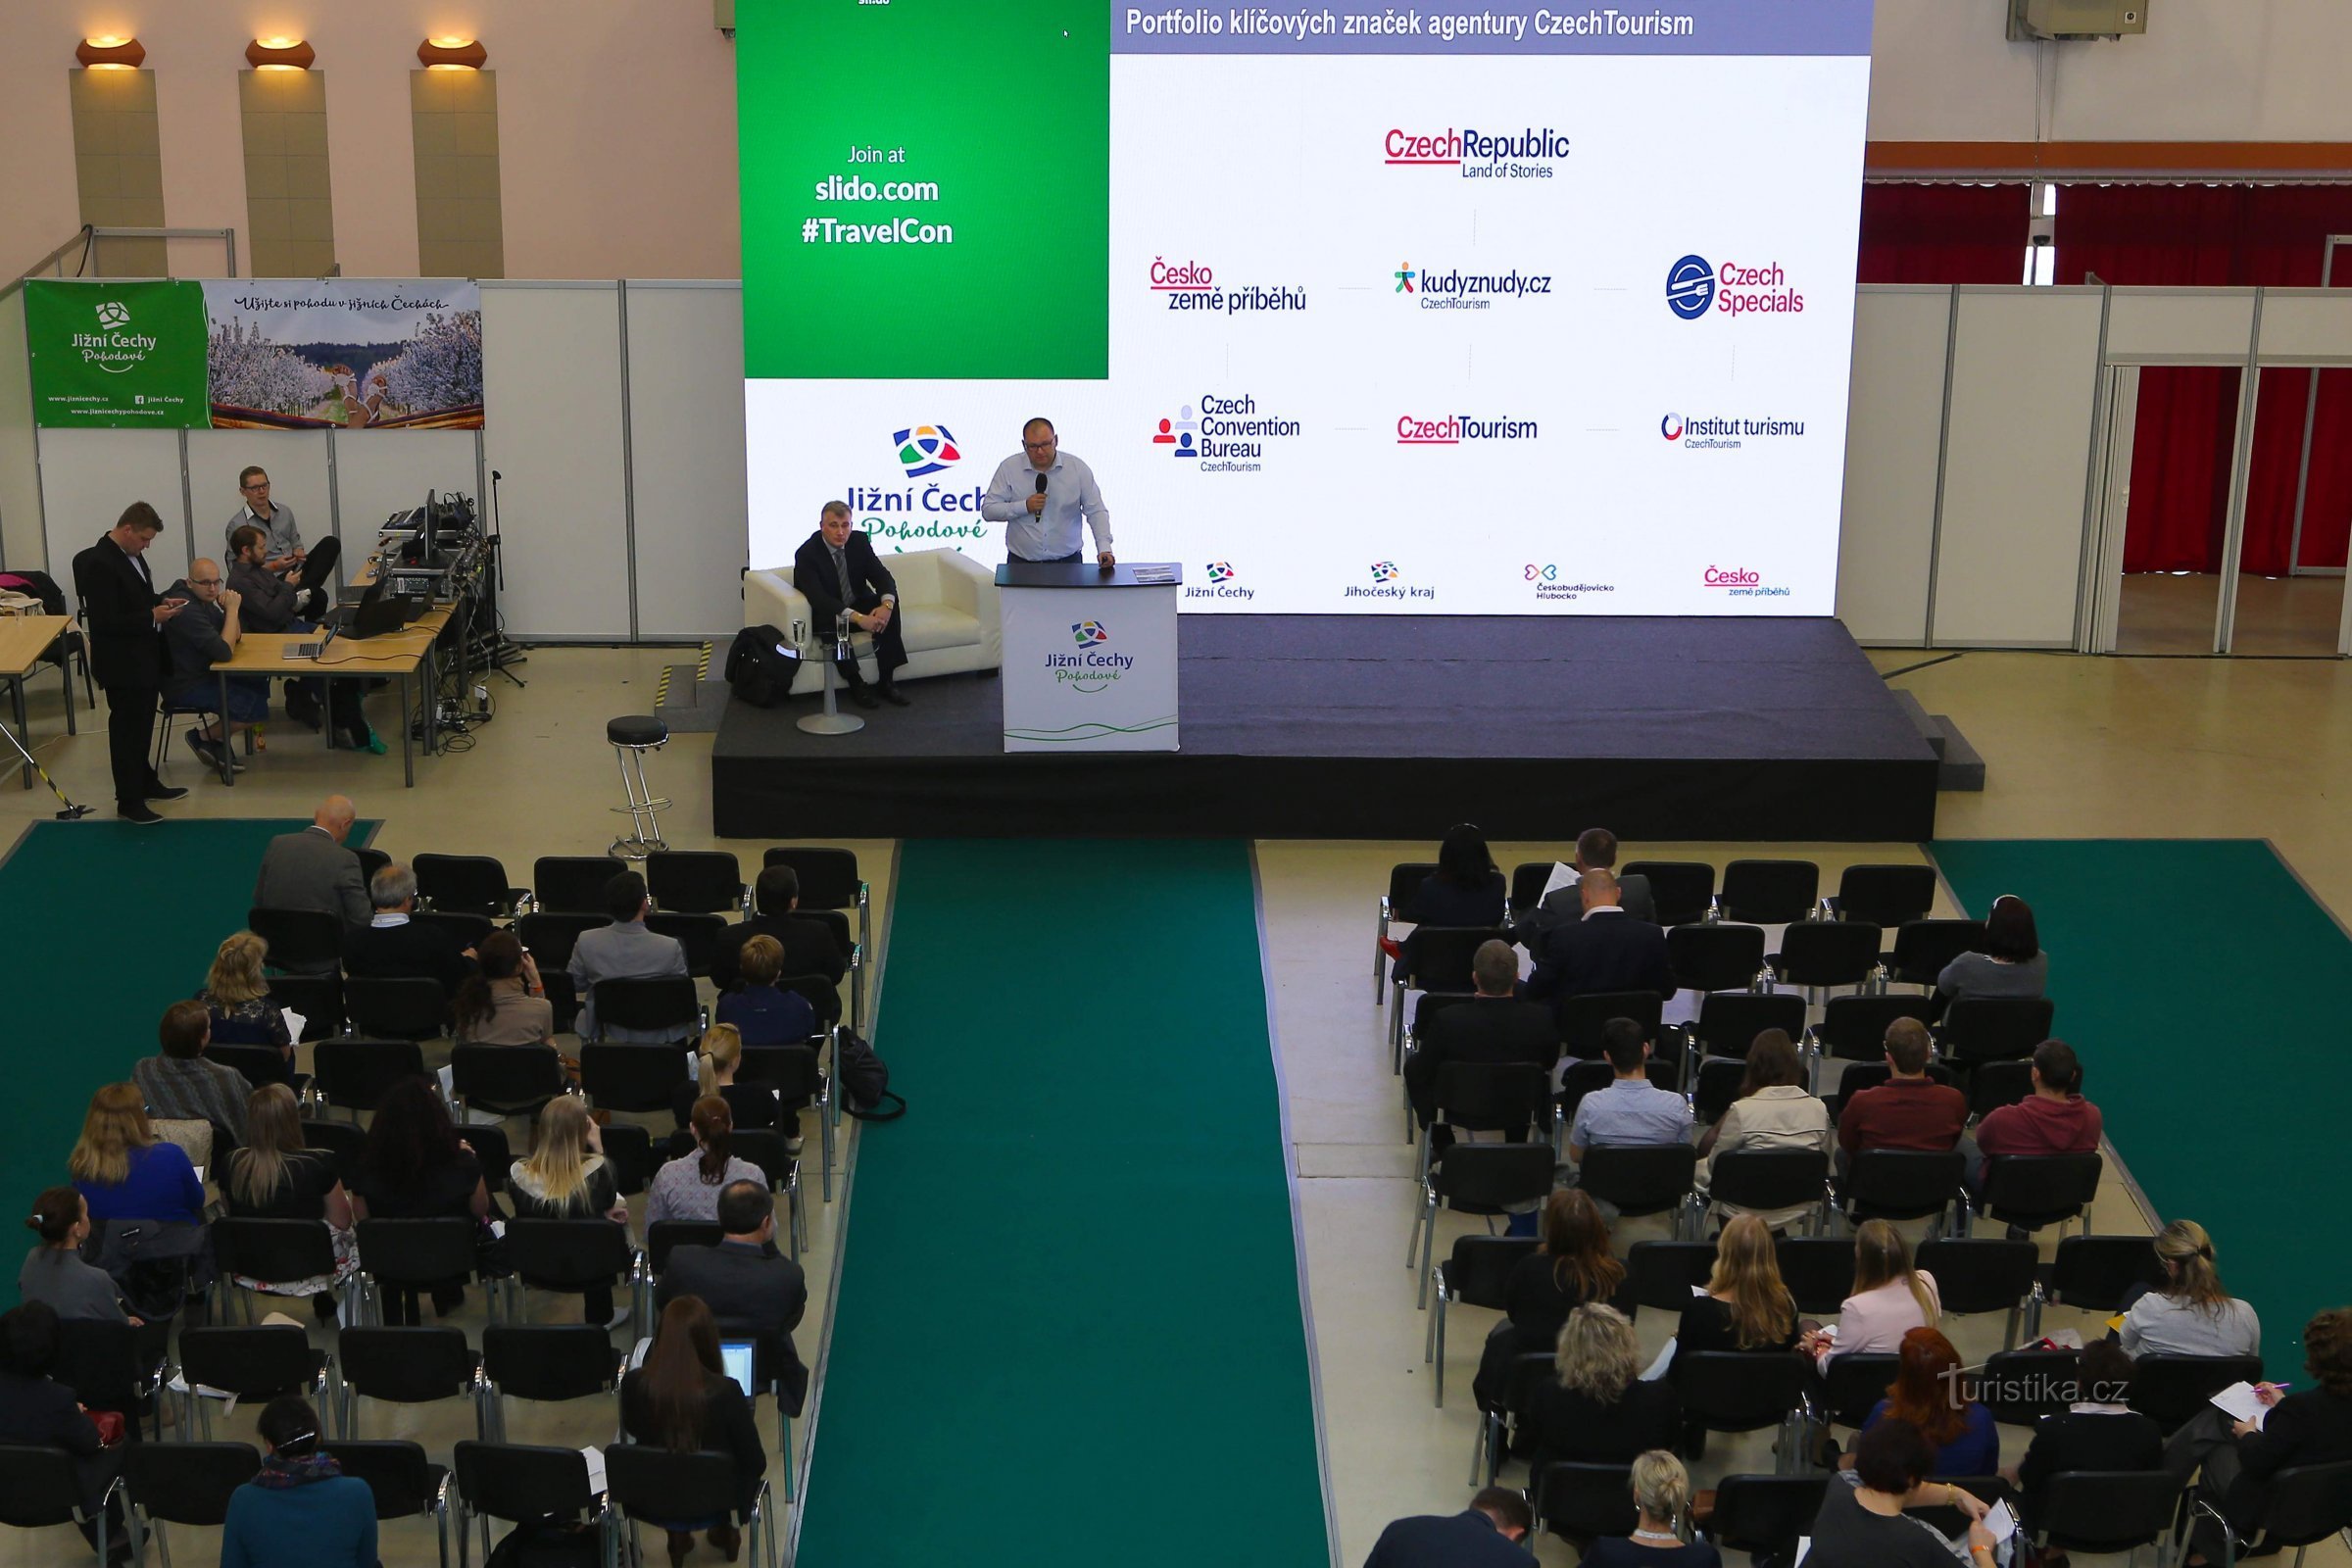 The exhibition center will host the second year of a professional conference dedicated to tourism